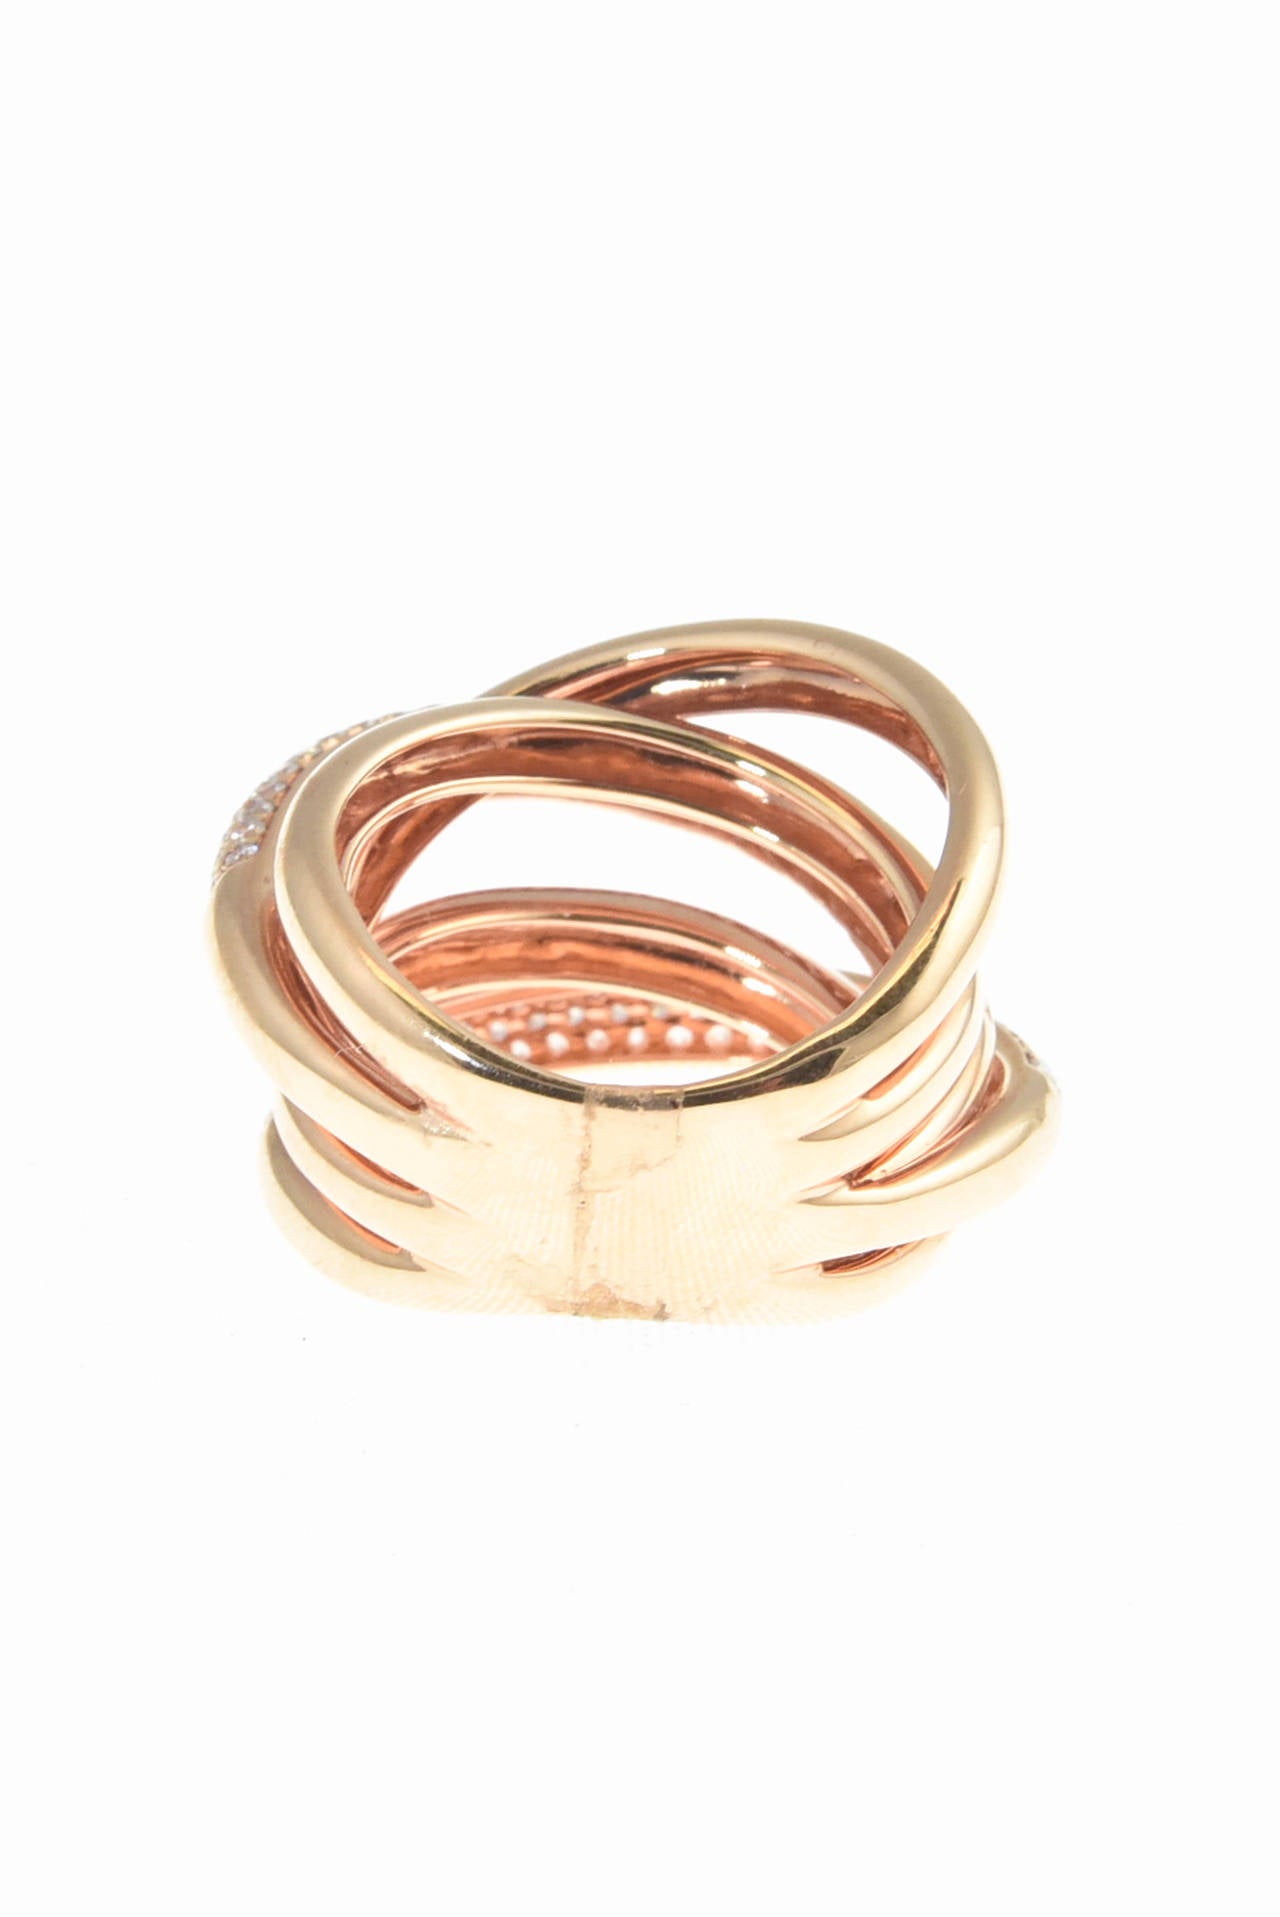 Three-Dimension Pave Diamond Rose Gold Overlapping Band Ring In Excellent Condition For Sale In Miami Beach, FL